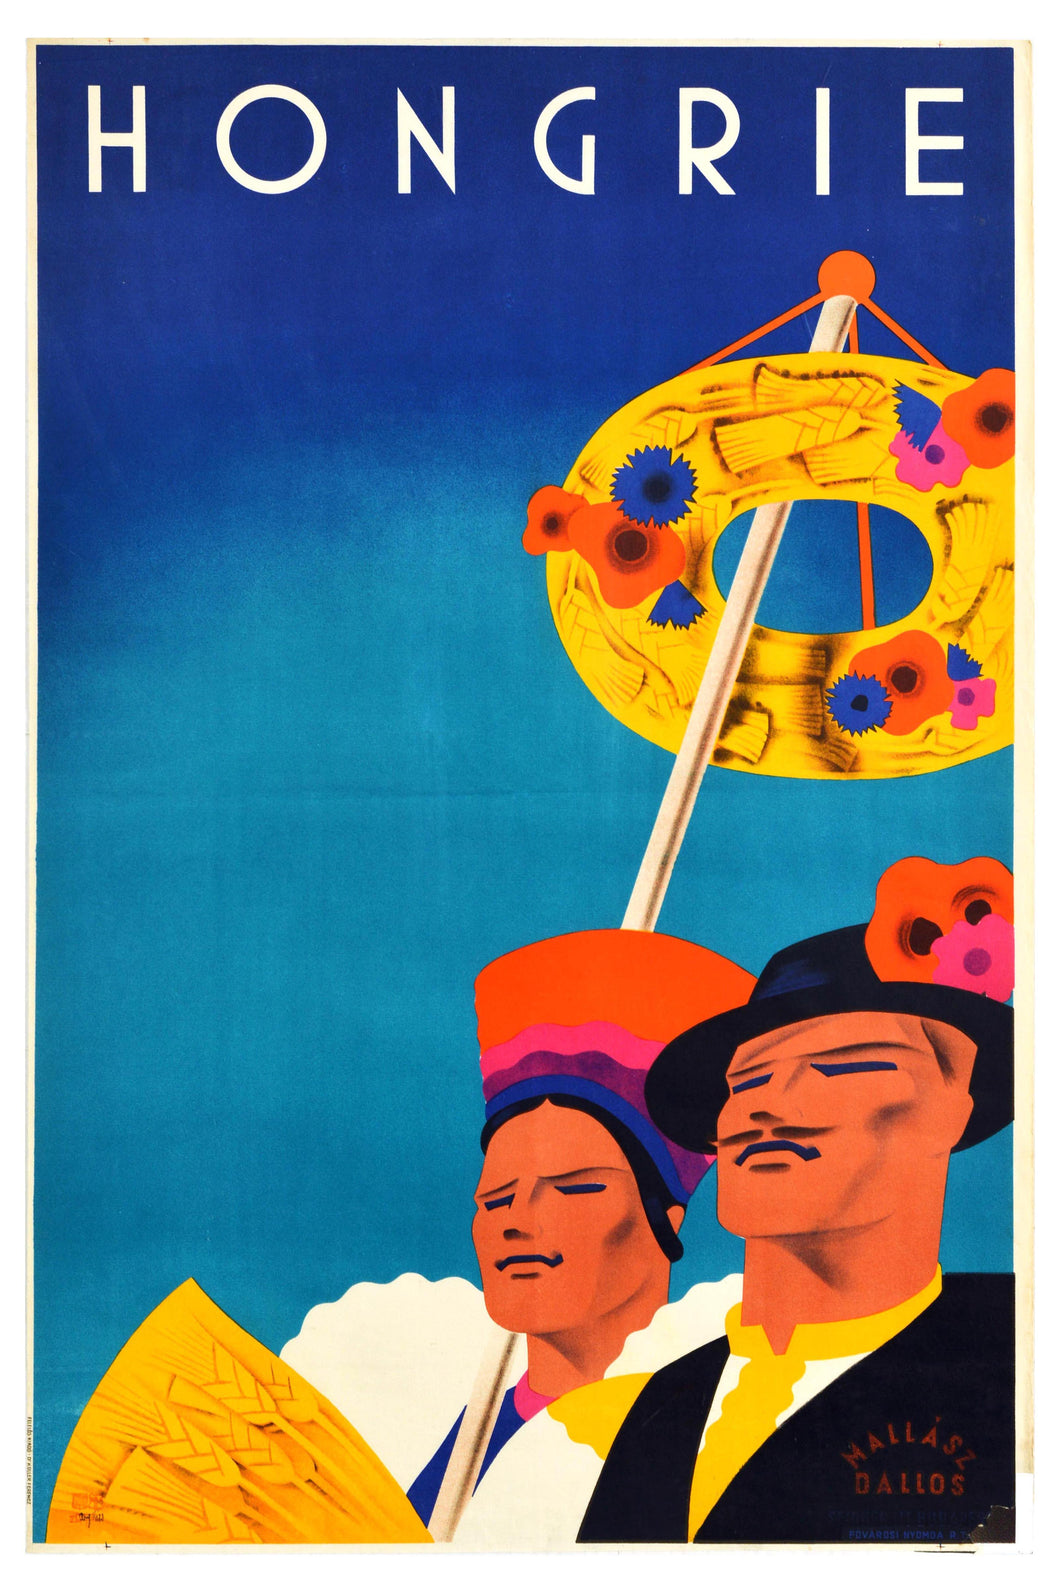 Vintage Hungary Tourism Poster A3/A4